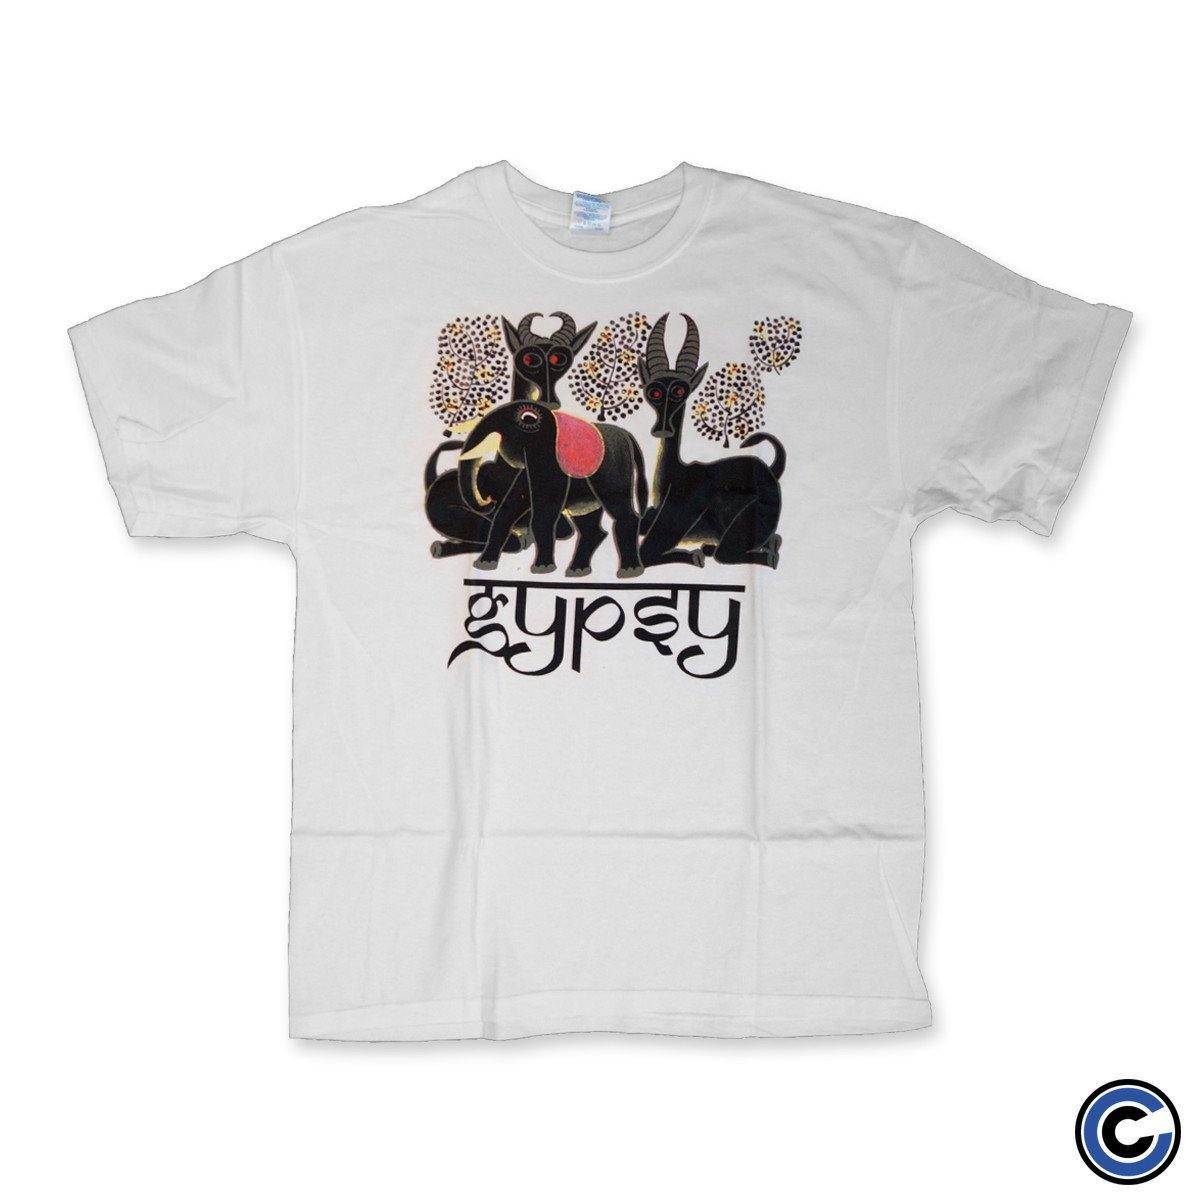 Buy – Gypsy "Music For Animals" Shirt – Band & Music Merch – Cold Cuts Merch